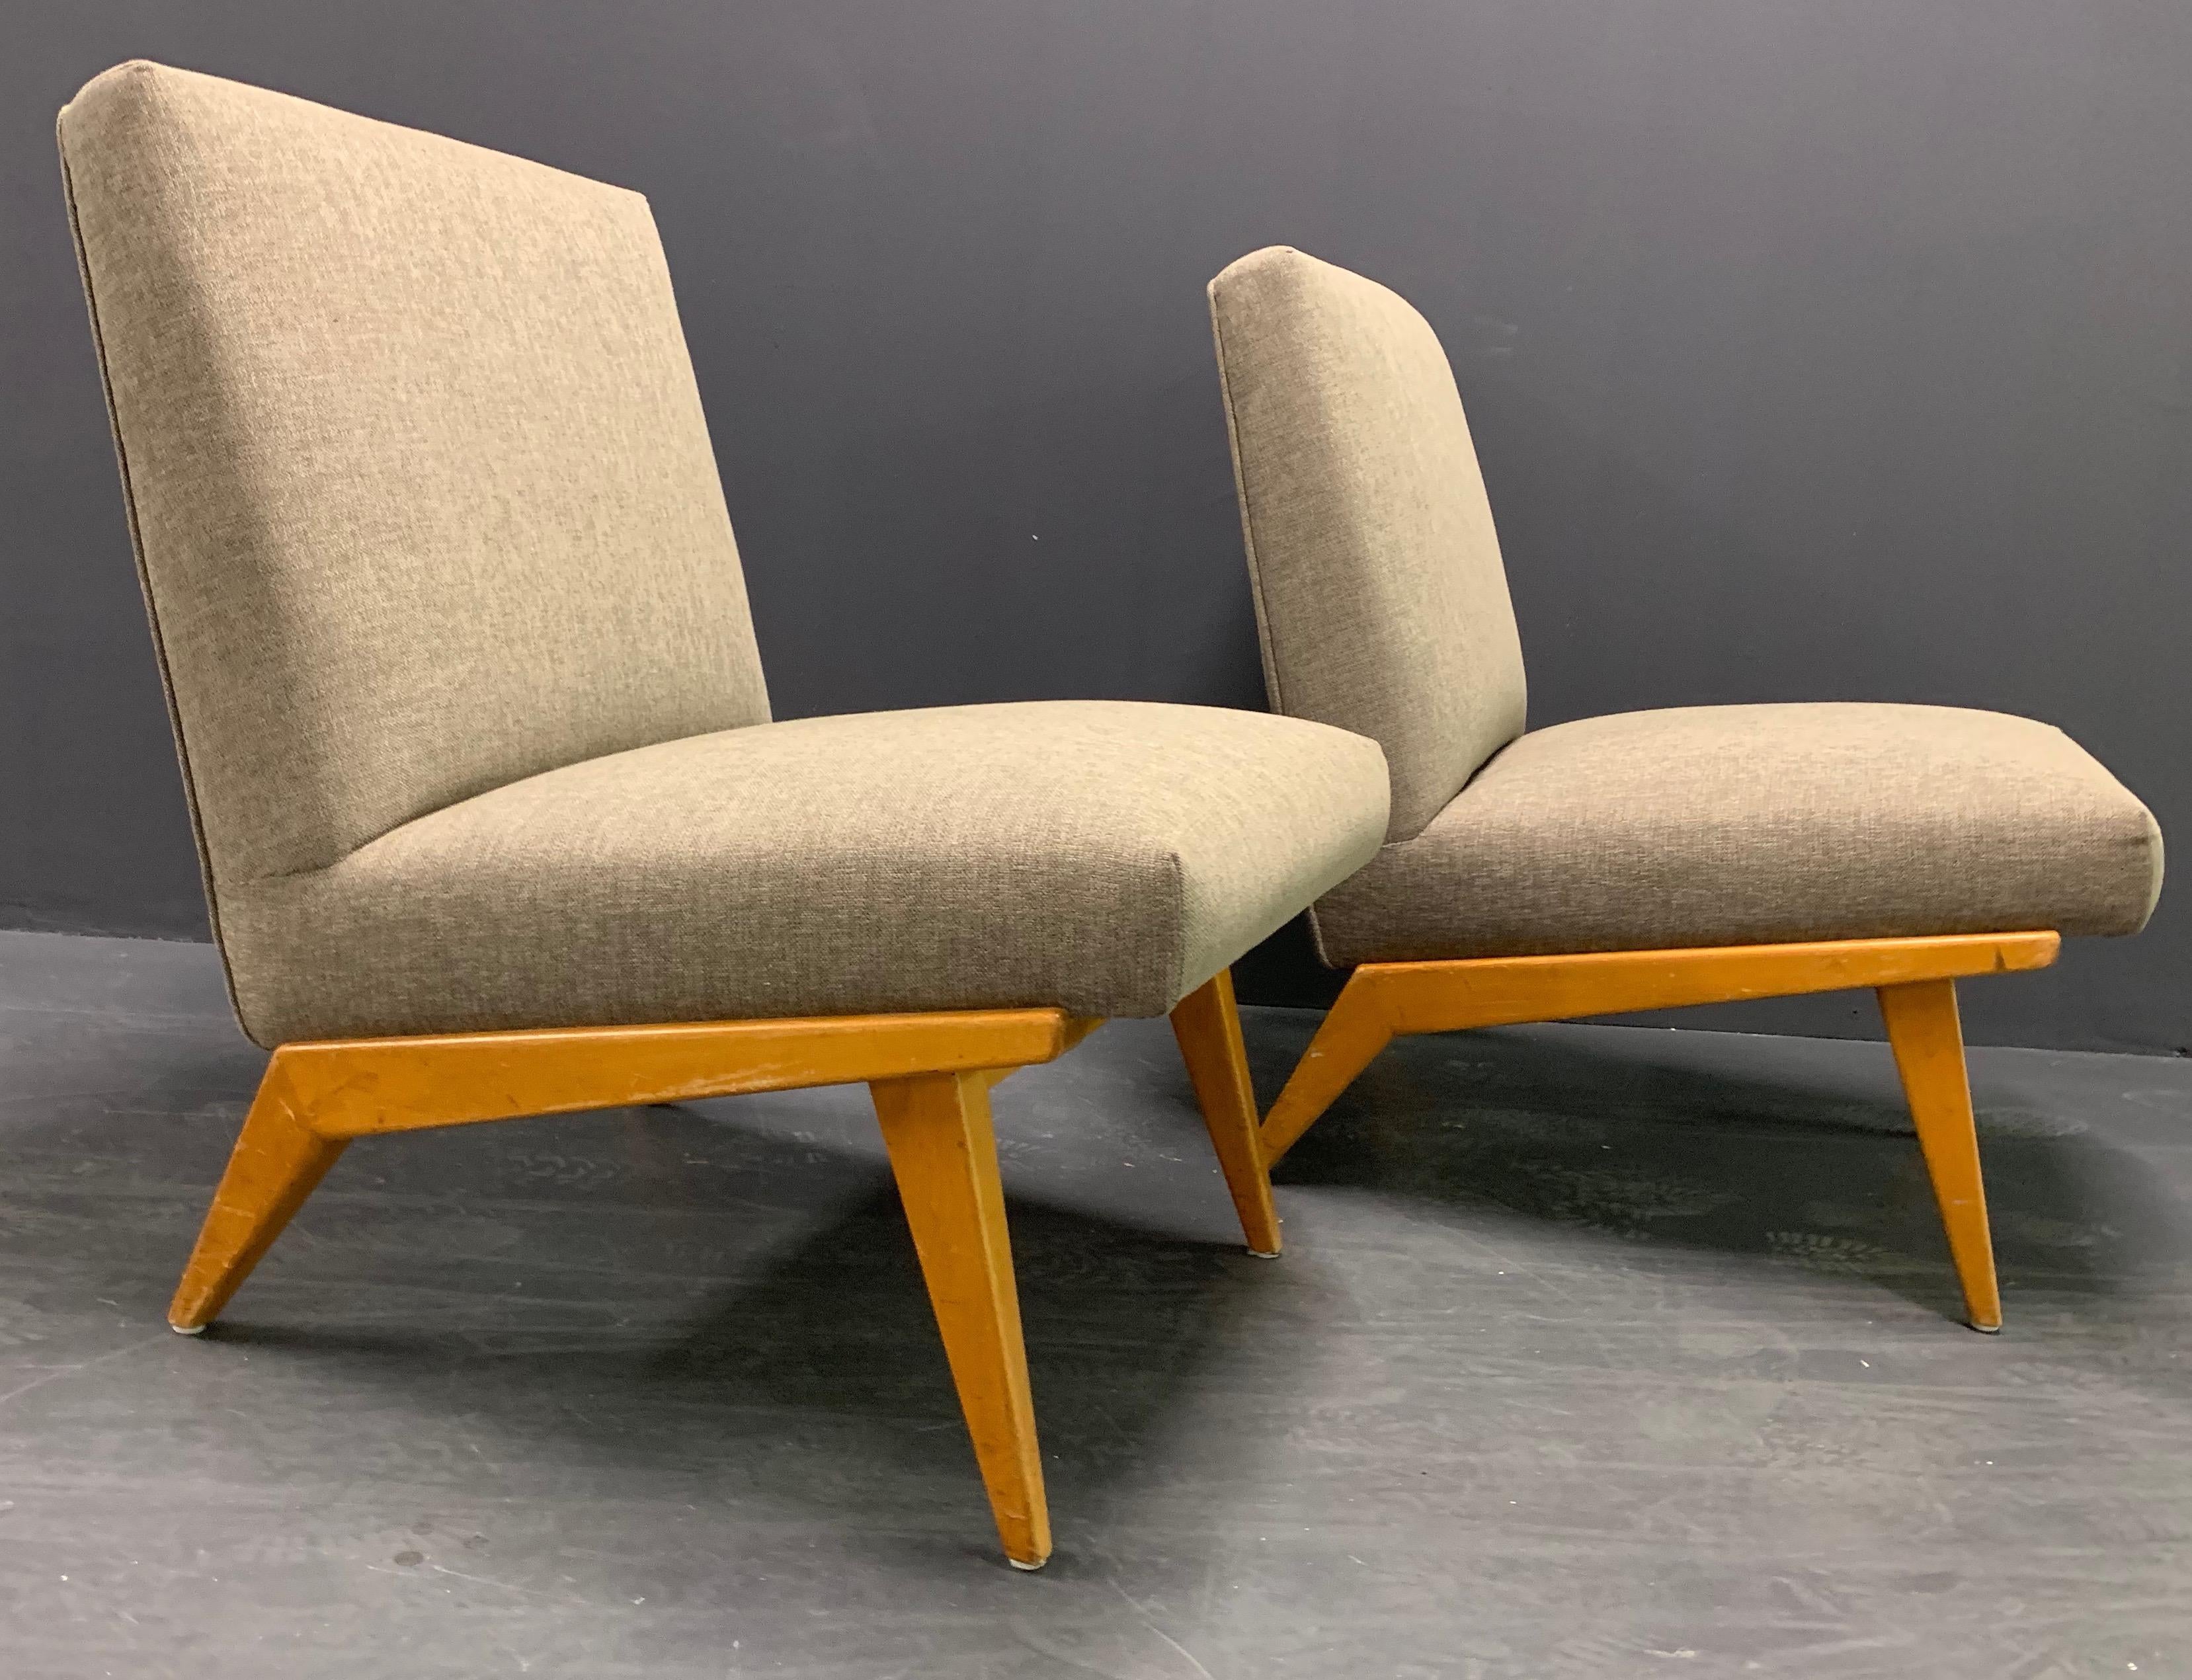 Mid-20th Century Rare Set of Two No.21 Lounge Chairs by Jens Risom for Knoll